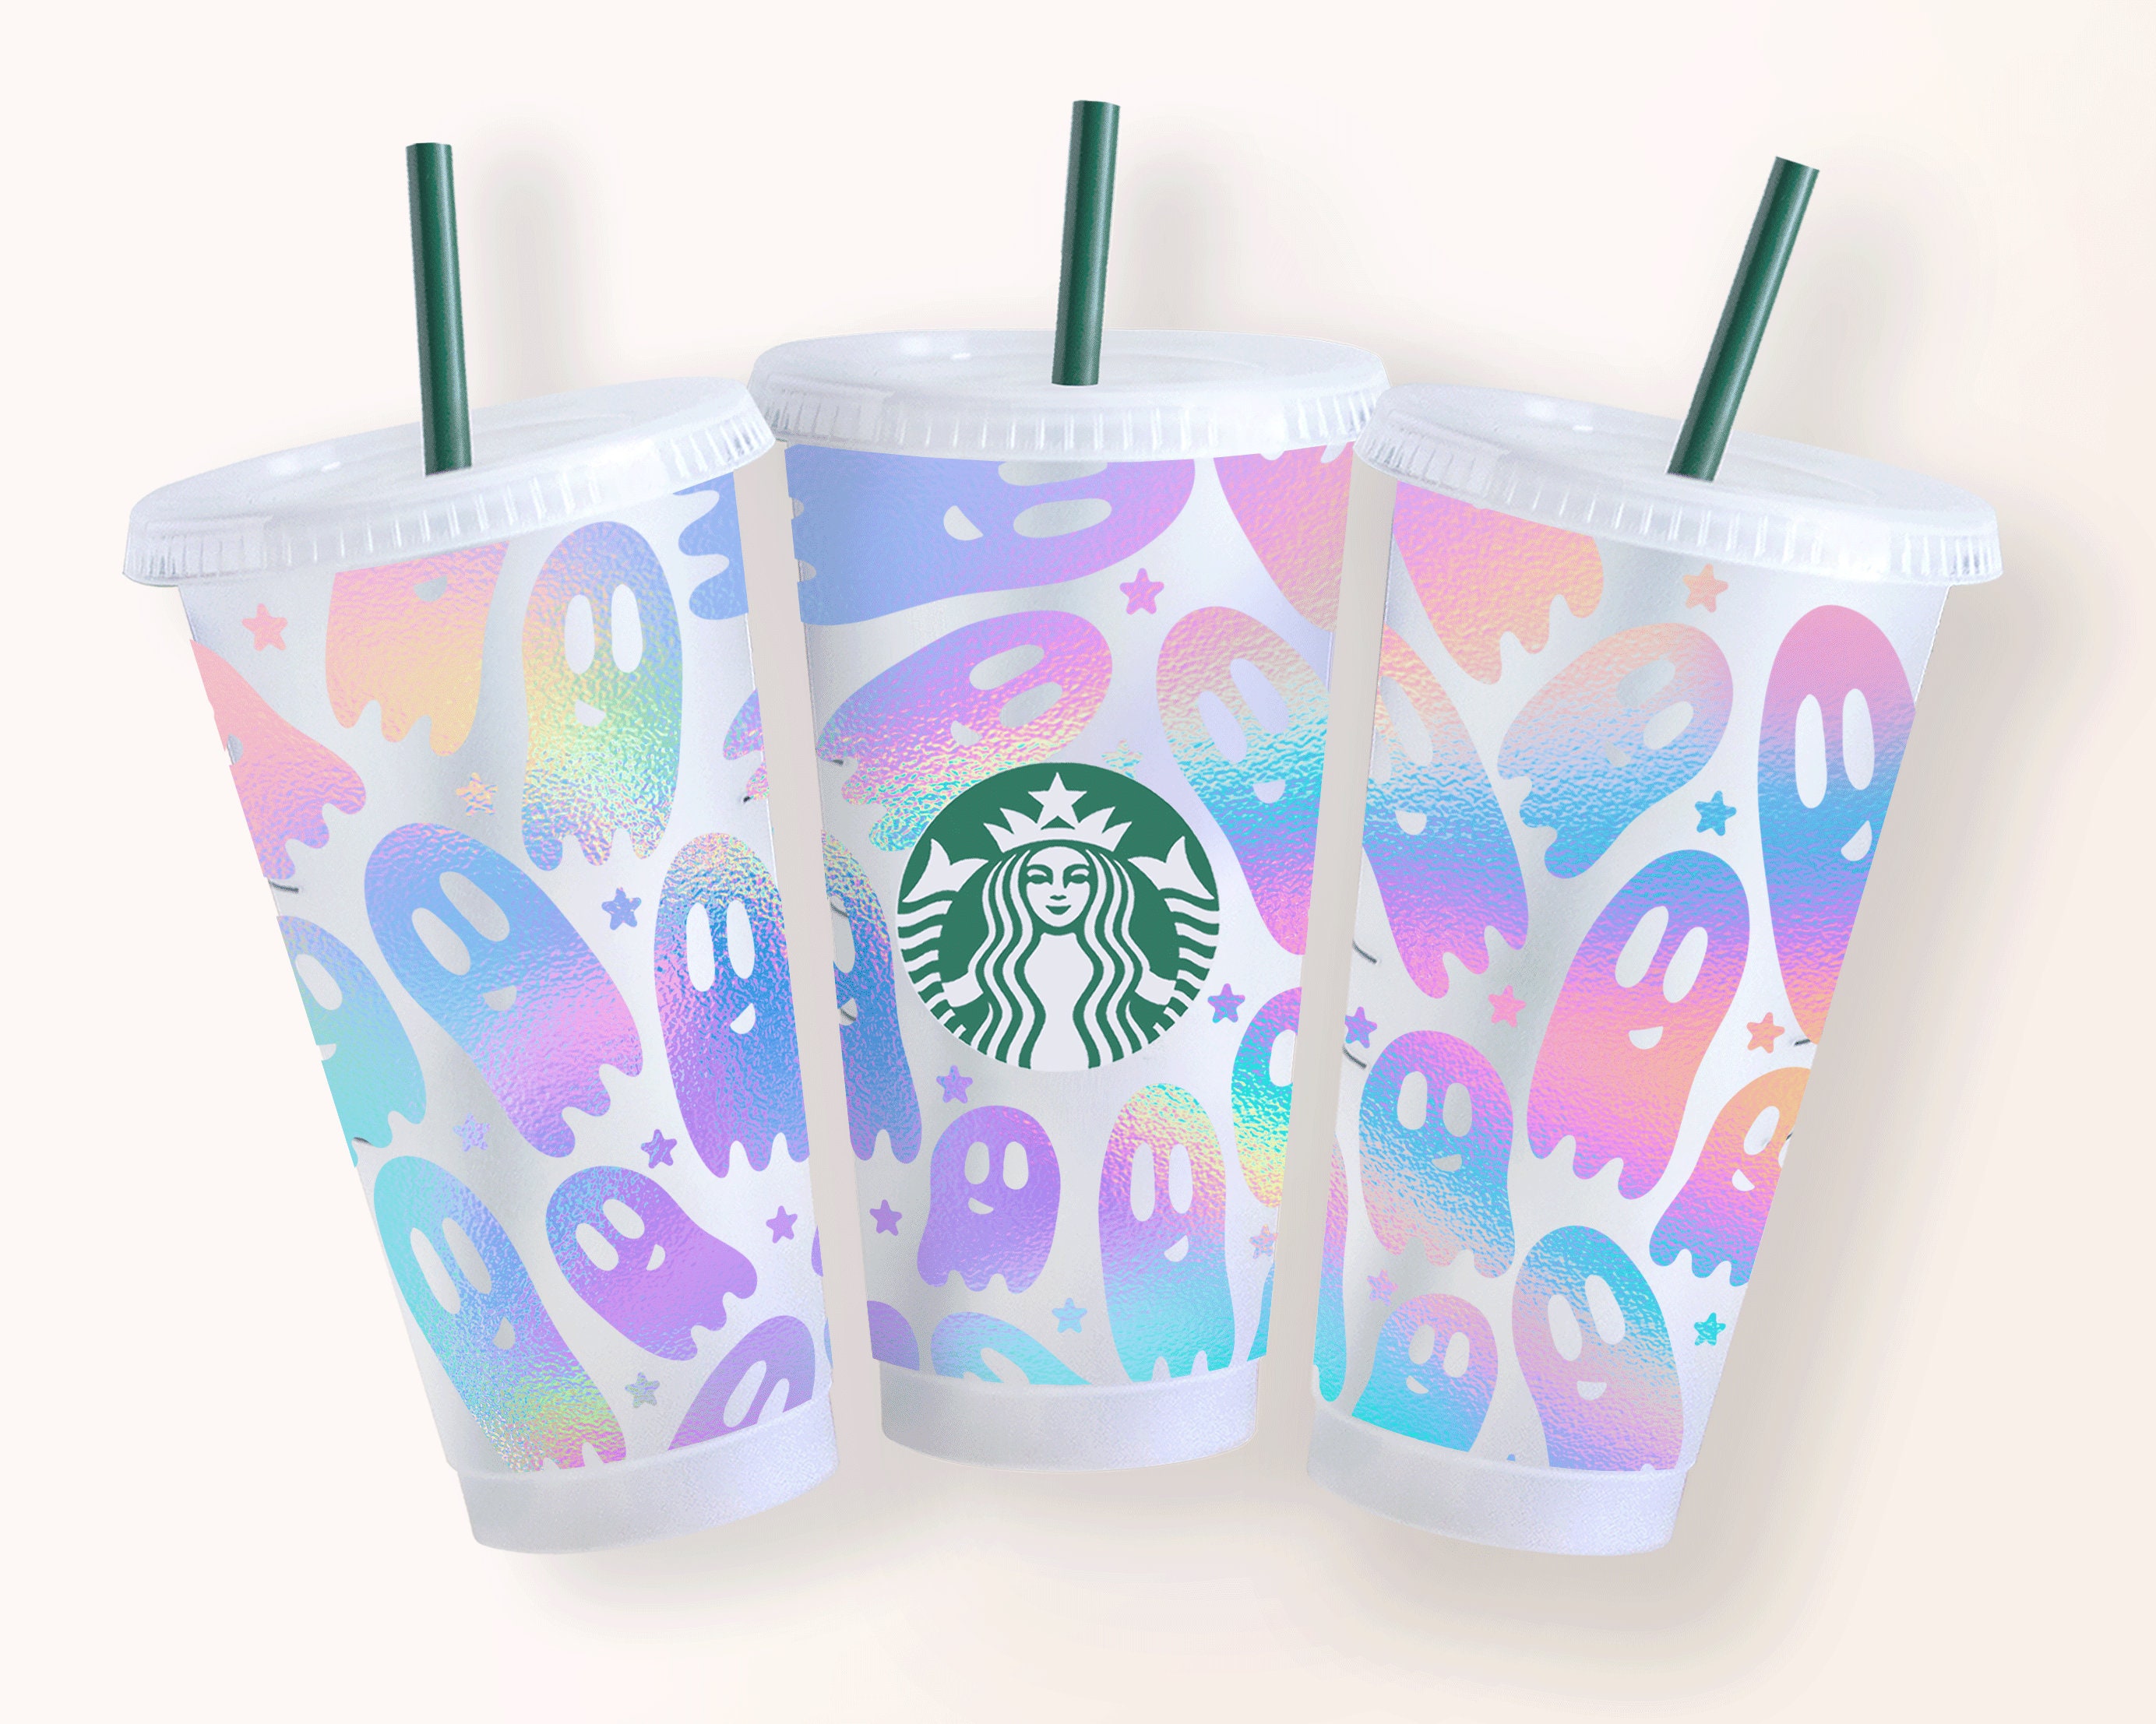 24oz Venti Cold Cup Smiley Ghosts for Starbucks Cup Svg Dxf - Etsy